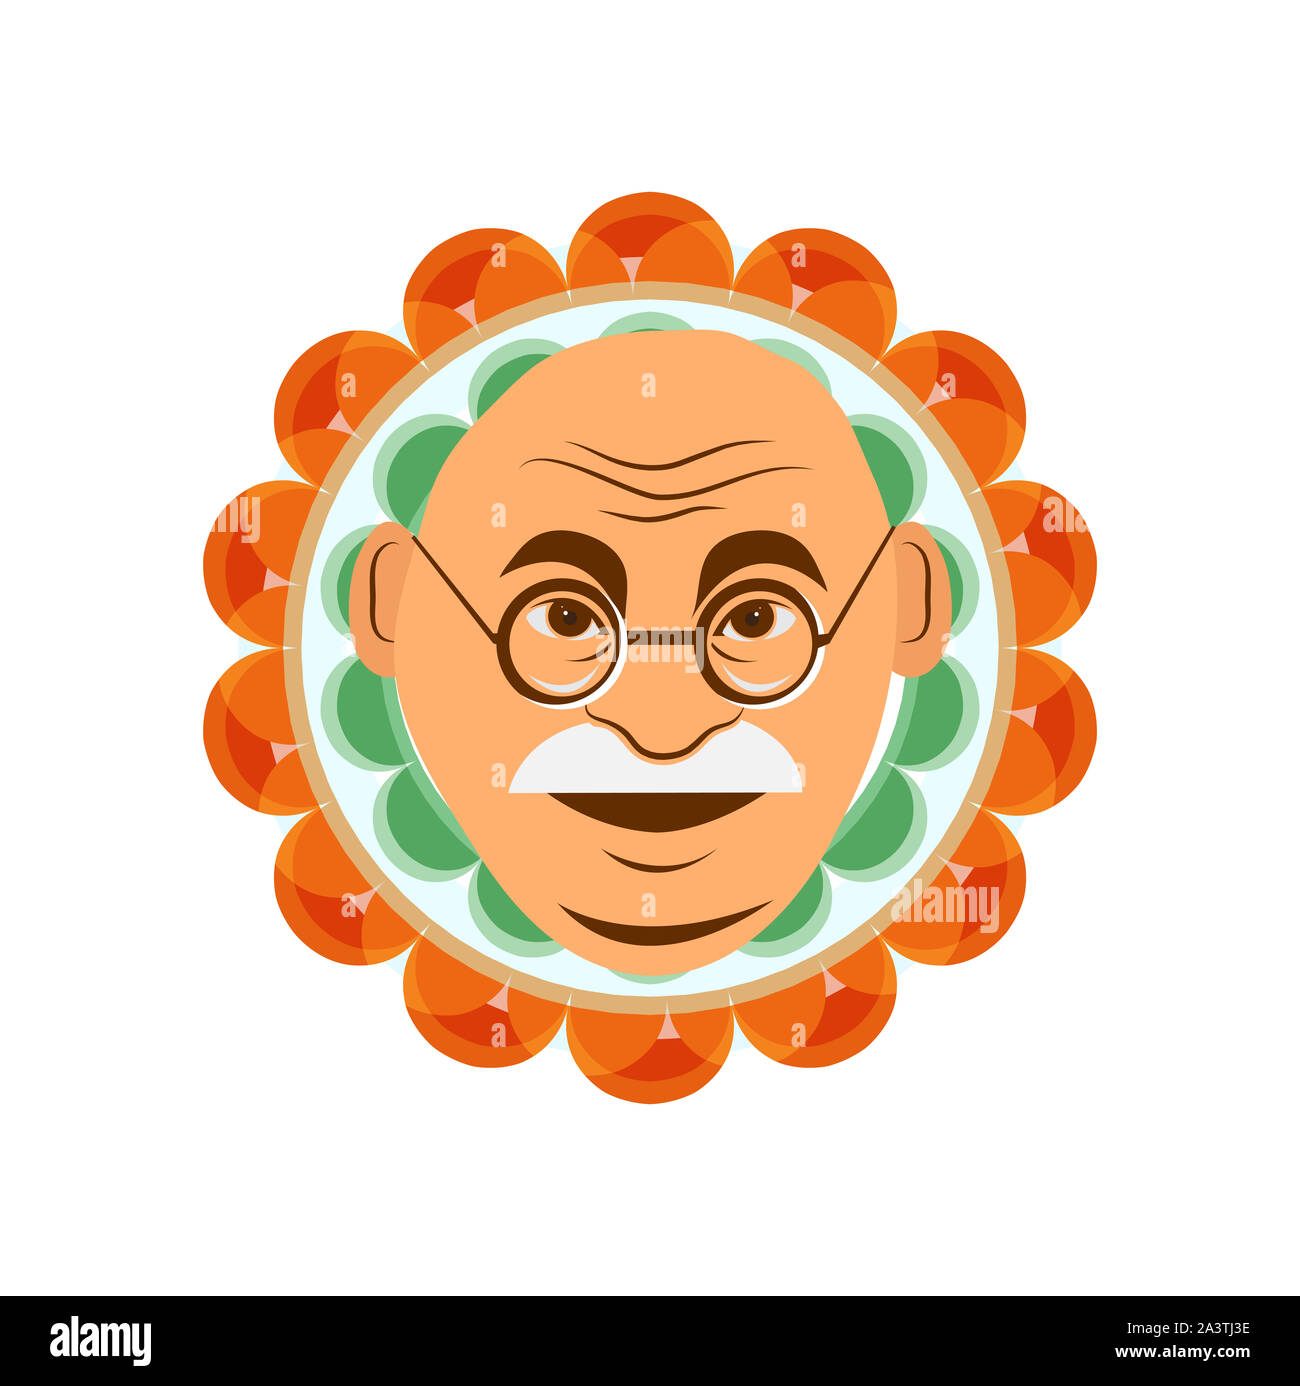 illustration of a background or poster for Happy Gandhi Jayanti or 2nd October. Stock Photo